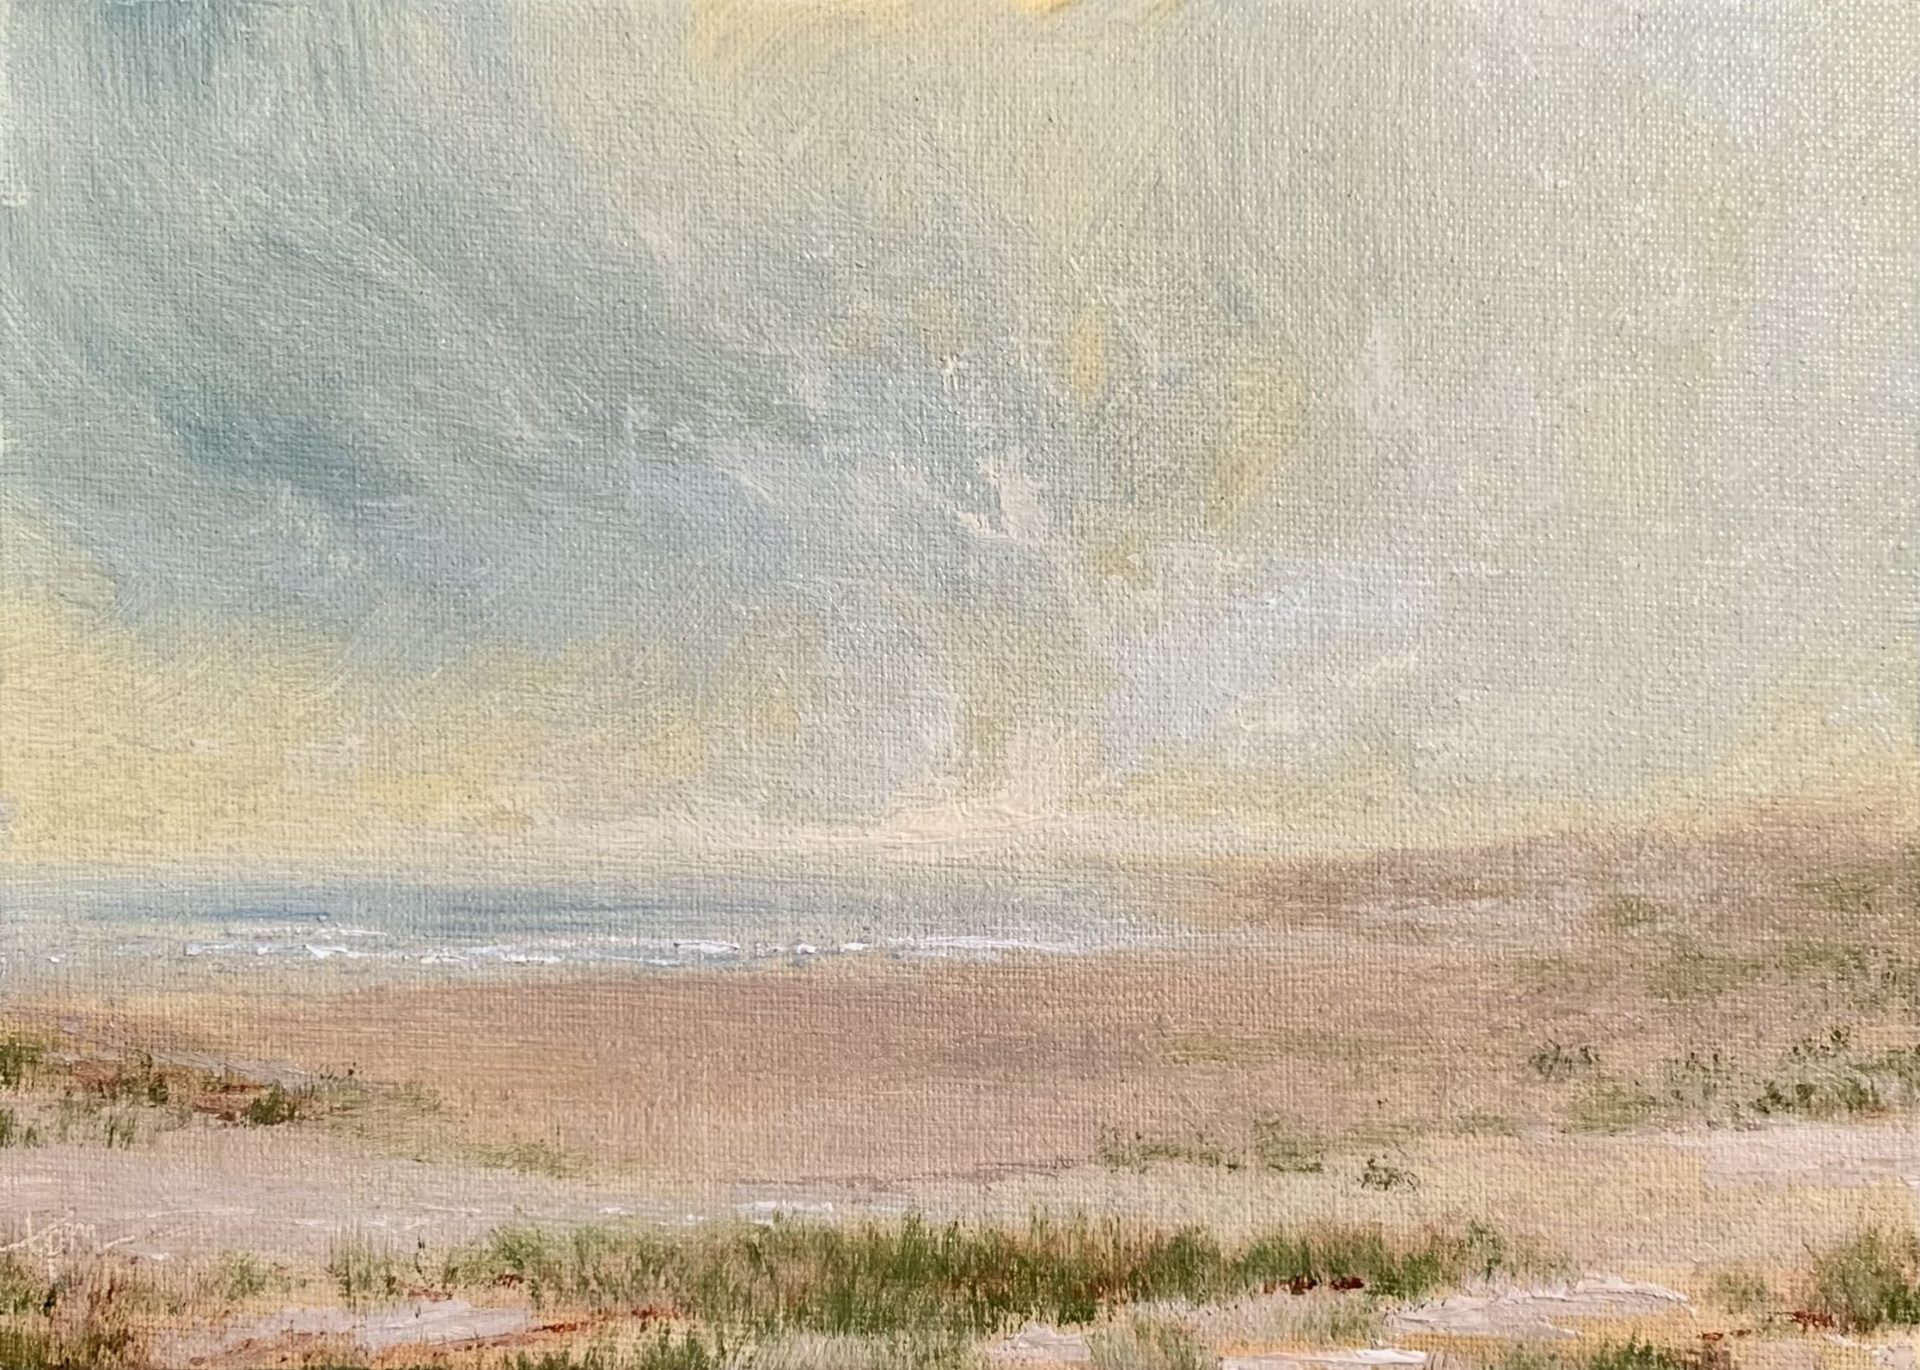 Photo of an original seascape oil painting by Tisha Mark, "When I Wake (Week 18, 52 Weeks of Finding Light Series)", 5"x7" oil on linen panel (2023). This is a soft, peaceful seashore scene at sunrise. The sky features soft yellows and blues, the shore has patches of sea grass among the sand.